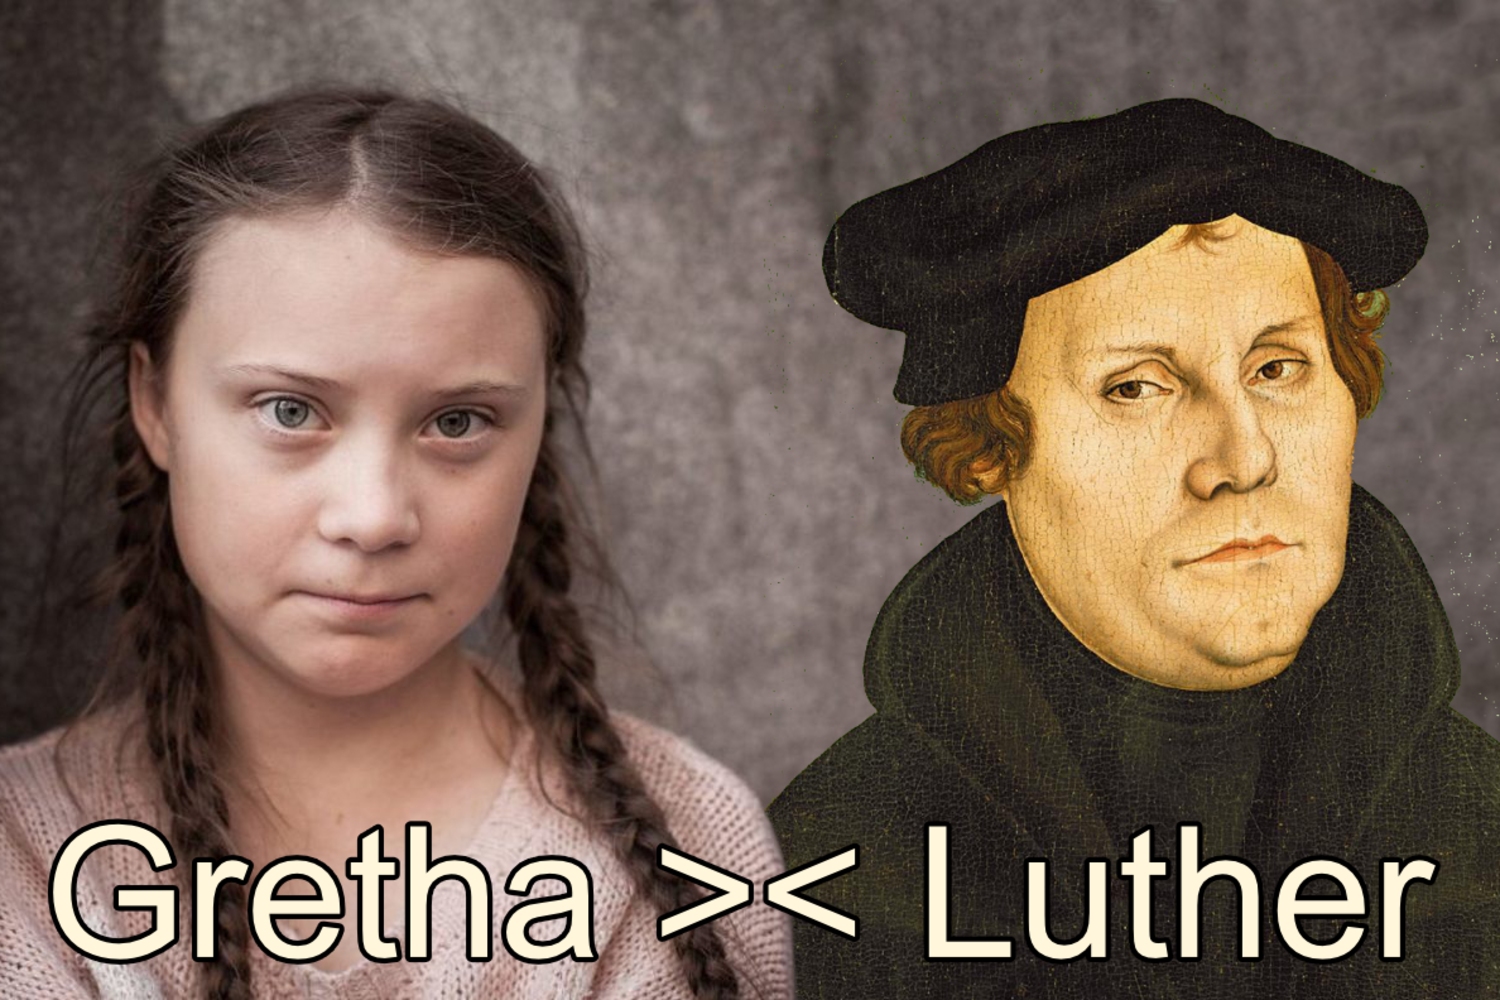 Gretha >< Luther